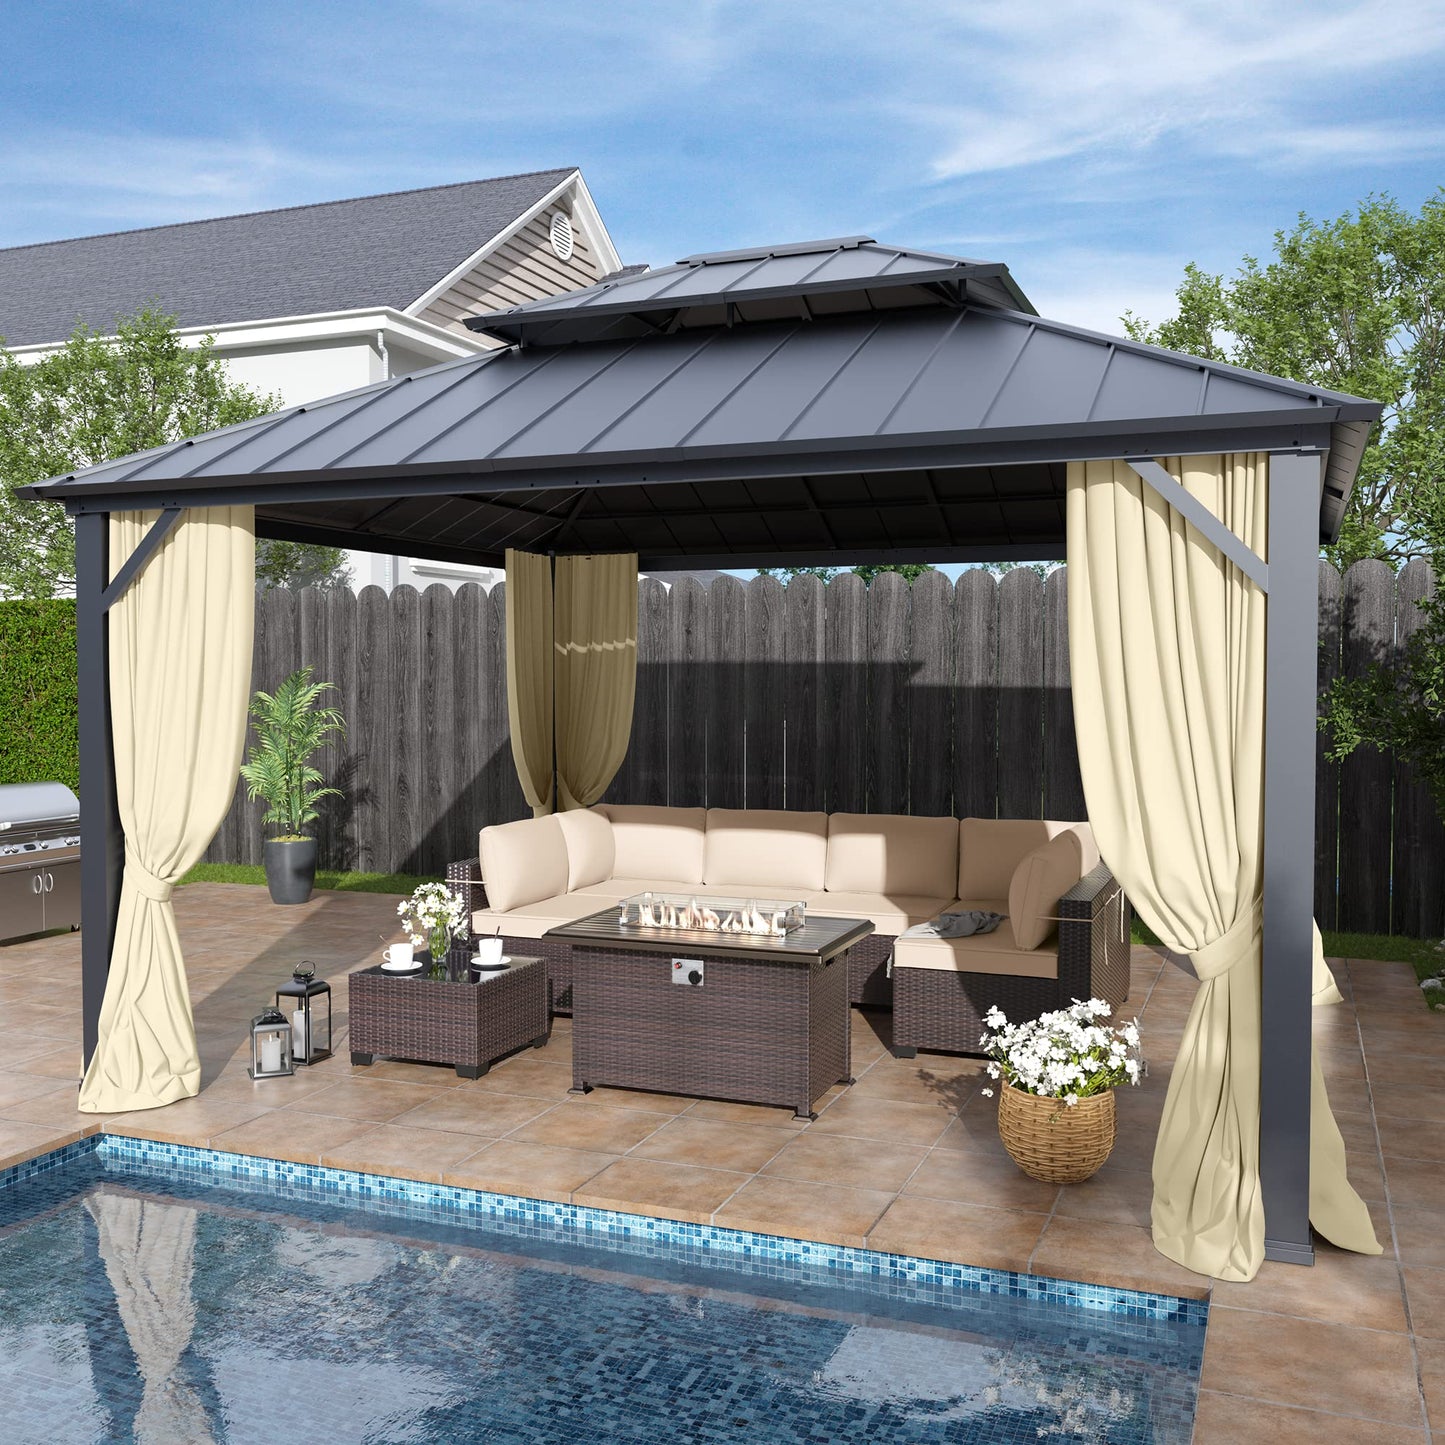 12' x 14' Hardtop Gazebo,Outdoor Galvanized Steel Metal Double Roof Gazebo with Curtains and Netting for Patios,Gardens, Lawns,Cream